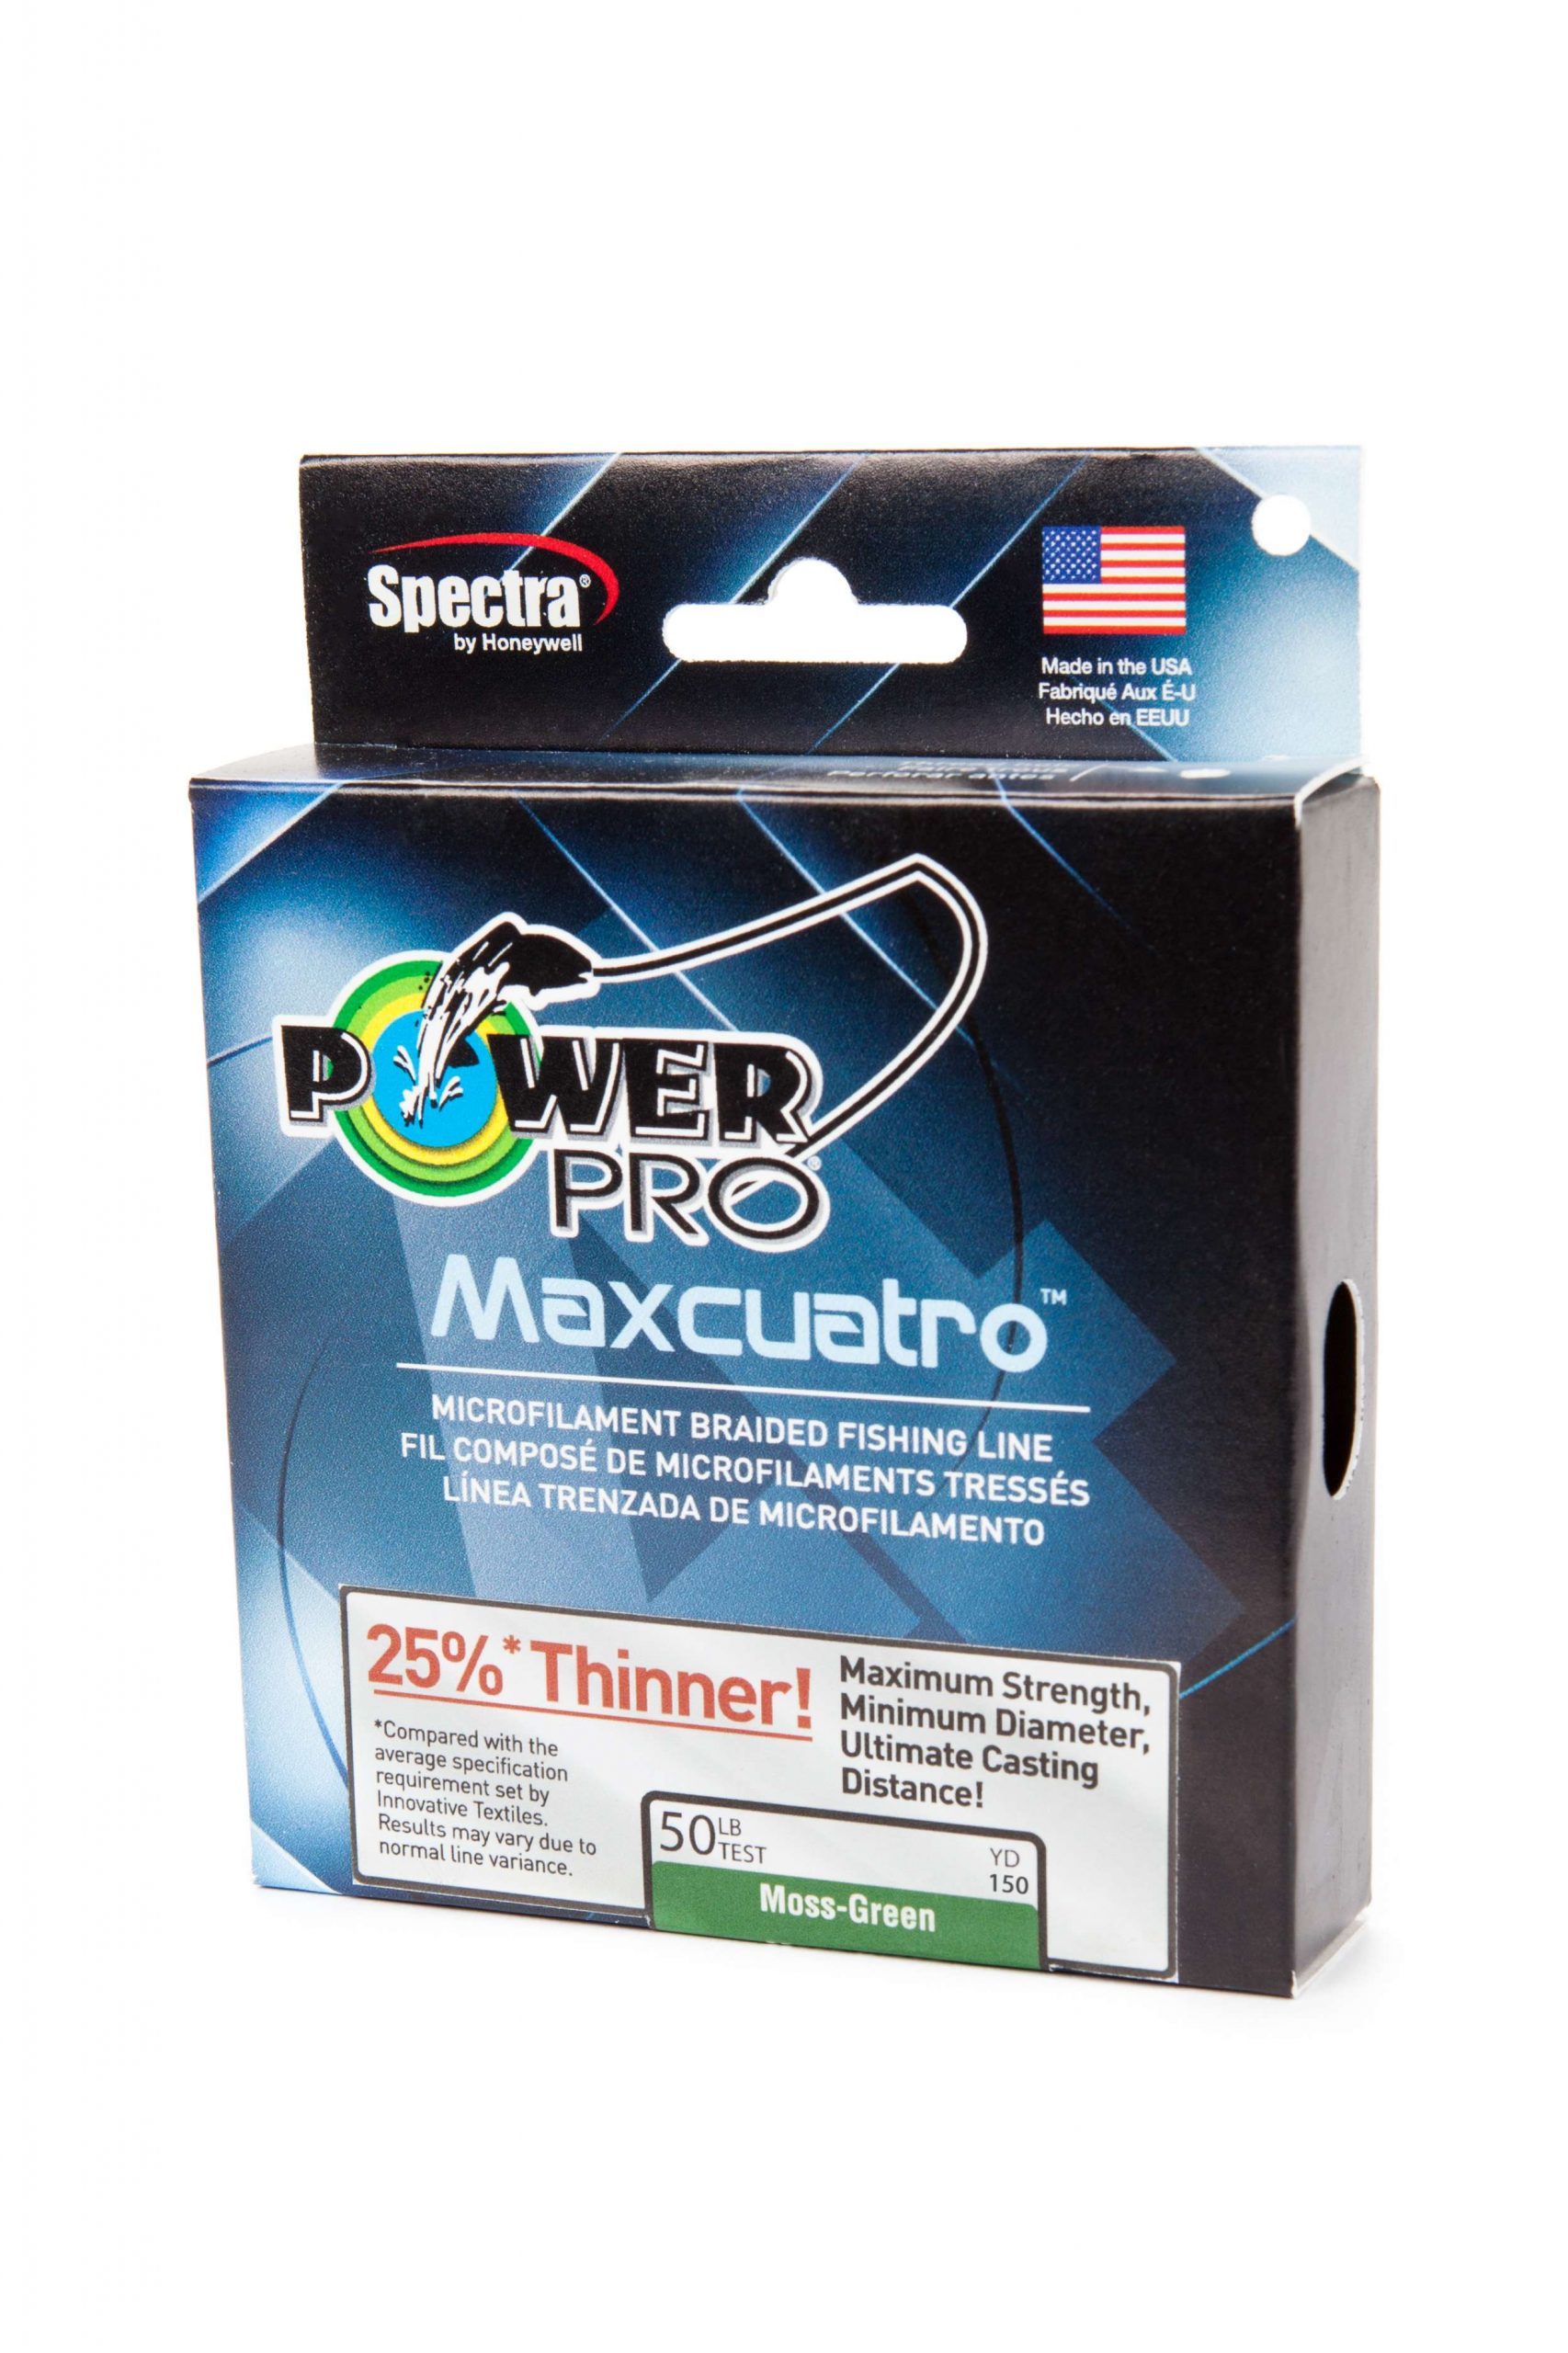 <b>PowerPro</b><br>	Maxcuatro<br>				Braided with new Spectra HT fiber from Honeywell that is up to 25 percent thinner than equivalent test pound braid, PowerPro introduces its new Maxcuatro fishing line, available in 50-, 65-, 80- and 100-pound test. Spectra HT fiber â exclusive to PowerPro for use in braided fishing line â allows for 4-End construction contributing to longer casting distance.